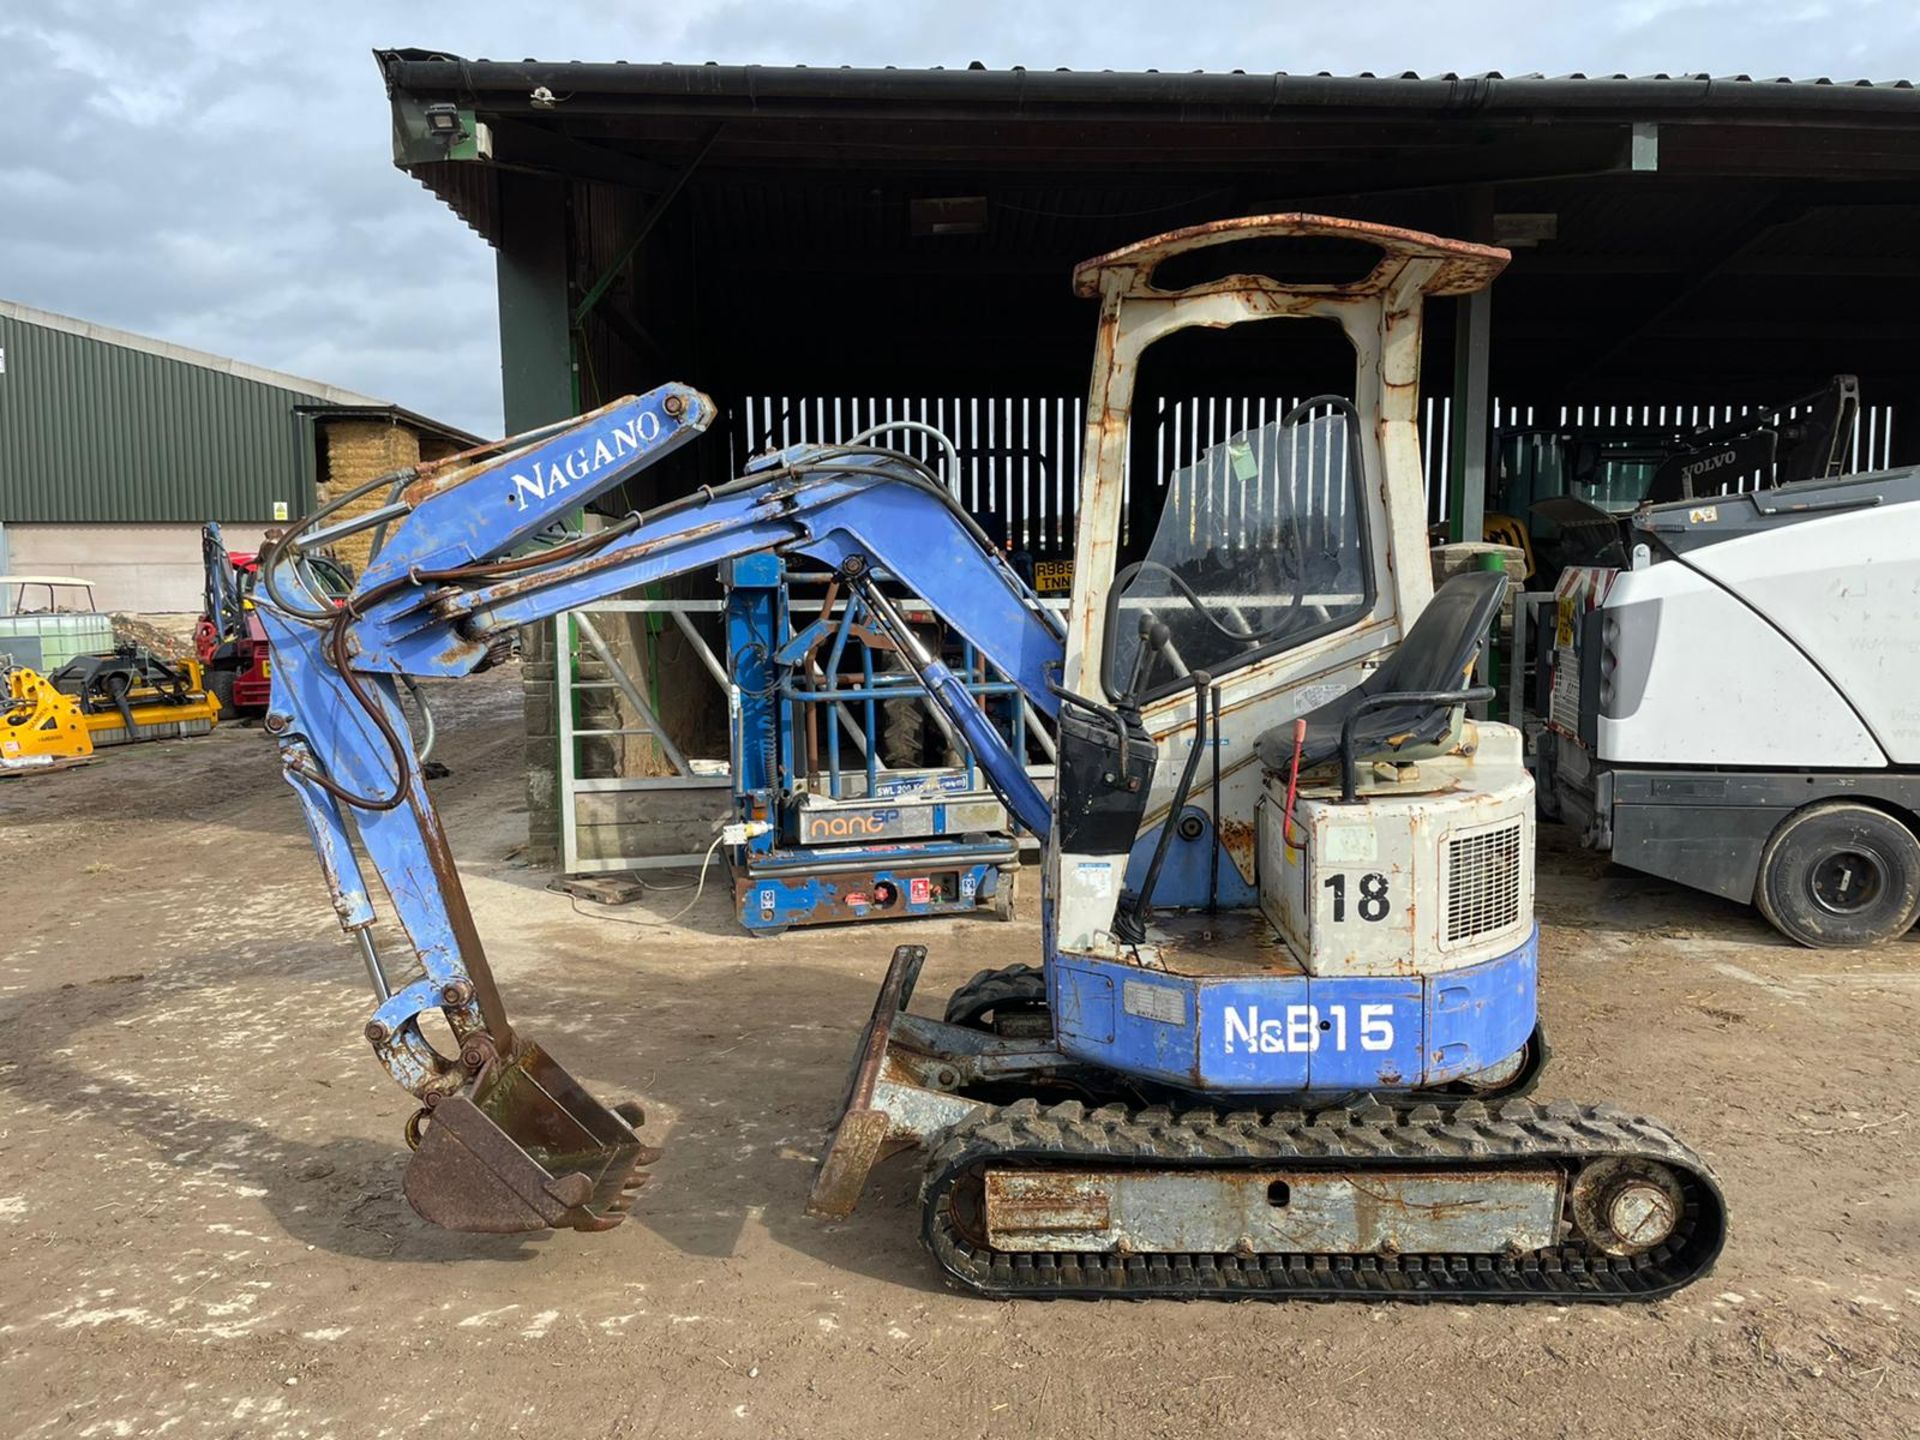 NAGNAO N&B15 MINI EXCAVATOR / DIGGER, RUNS, DRIVES AND DIGS, IN USED BUT GOOD CONDITION *PLUS VAT* - Image 10 of 16